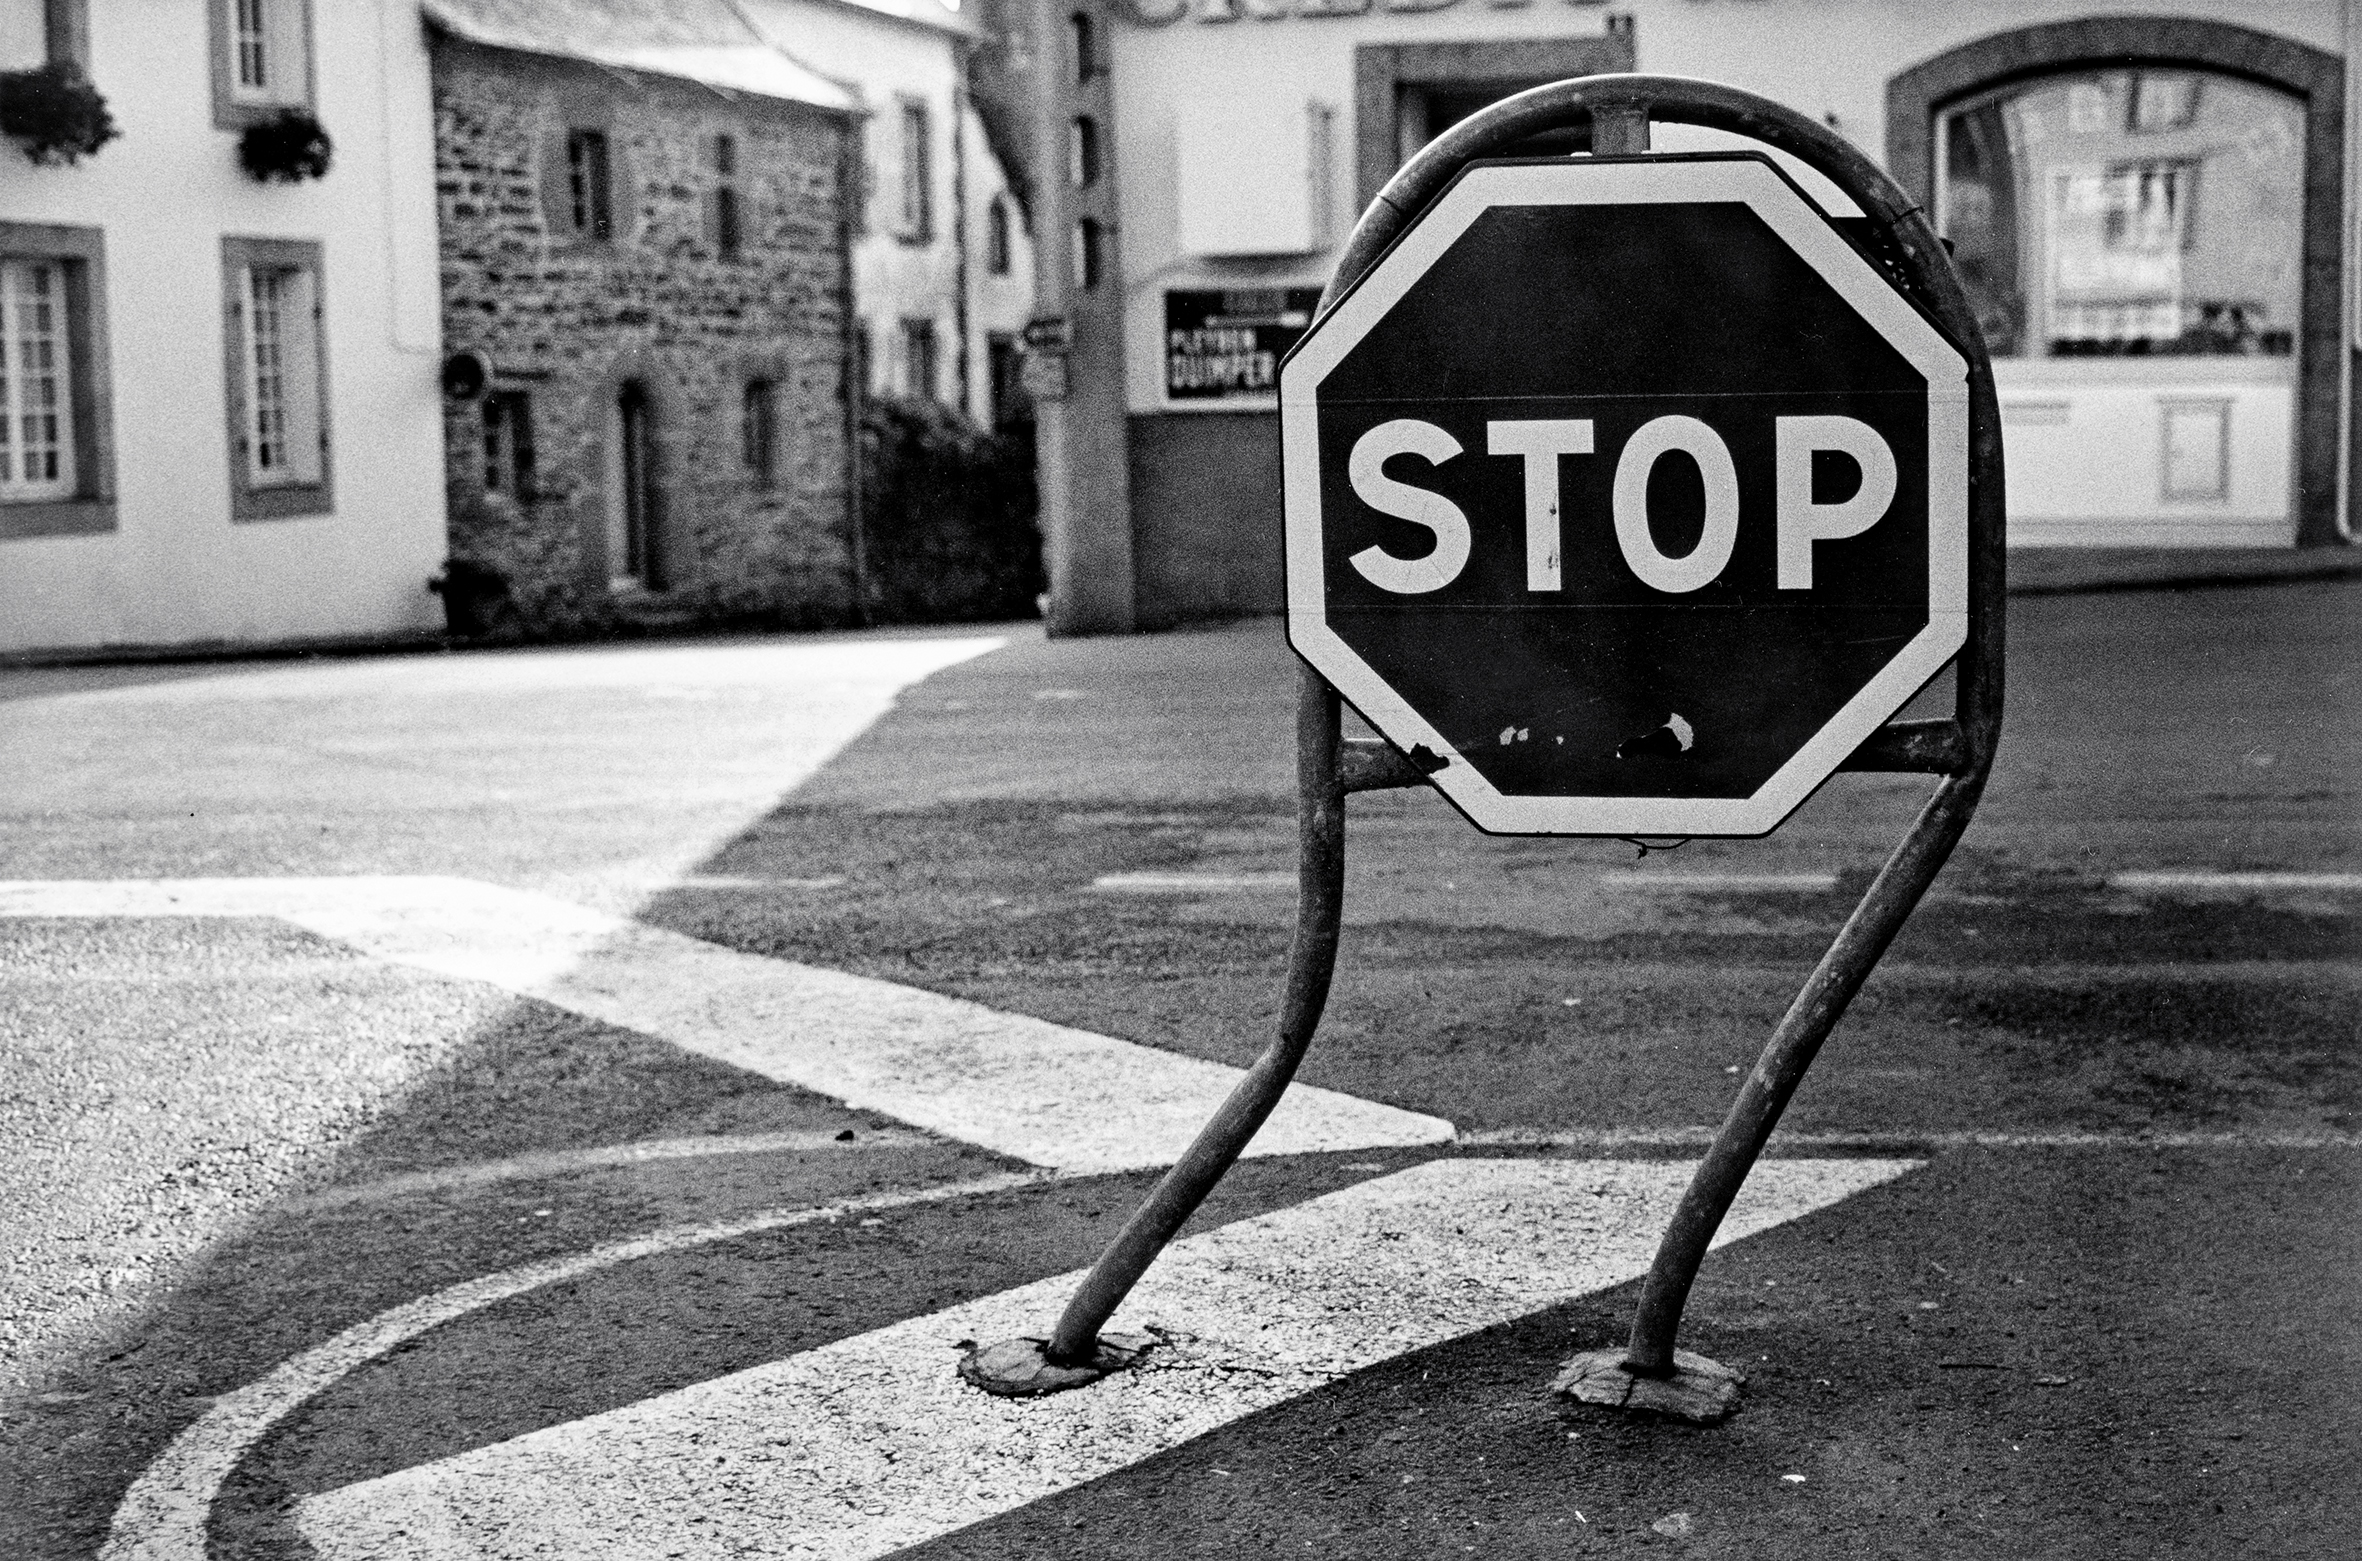 Dammaged stop sign